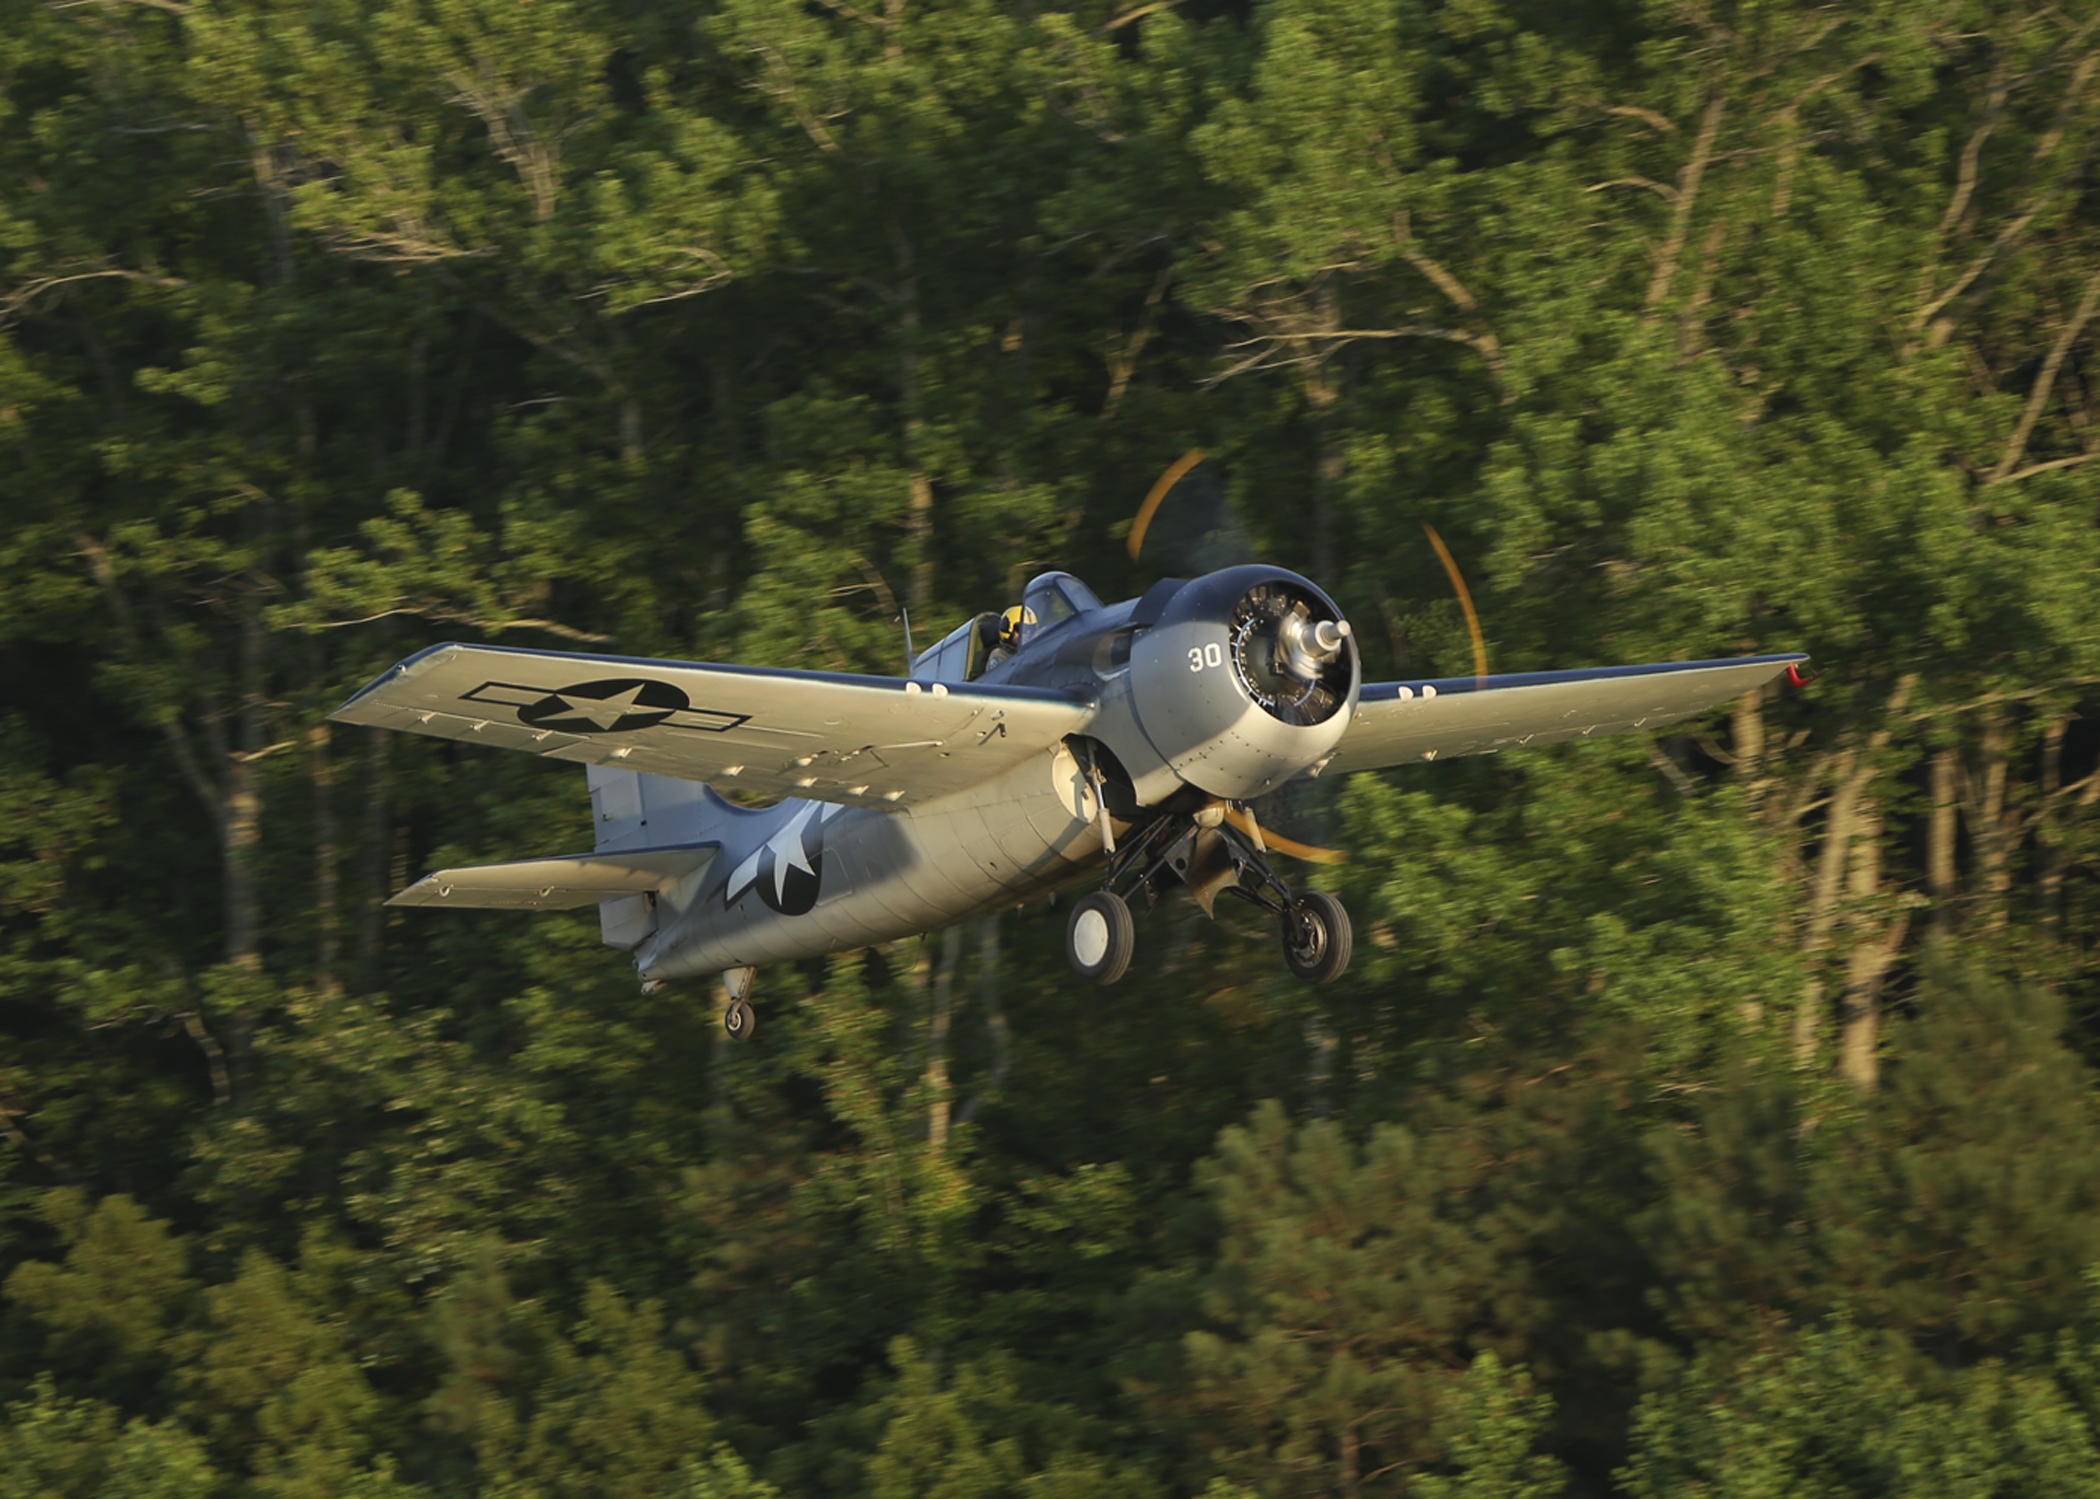 FM-2 Wildcat taking to the air.